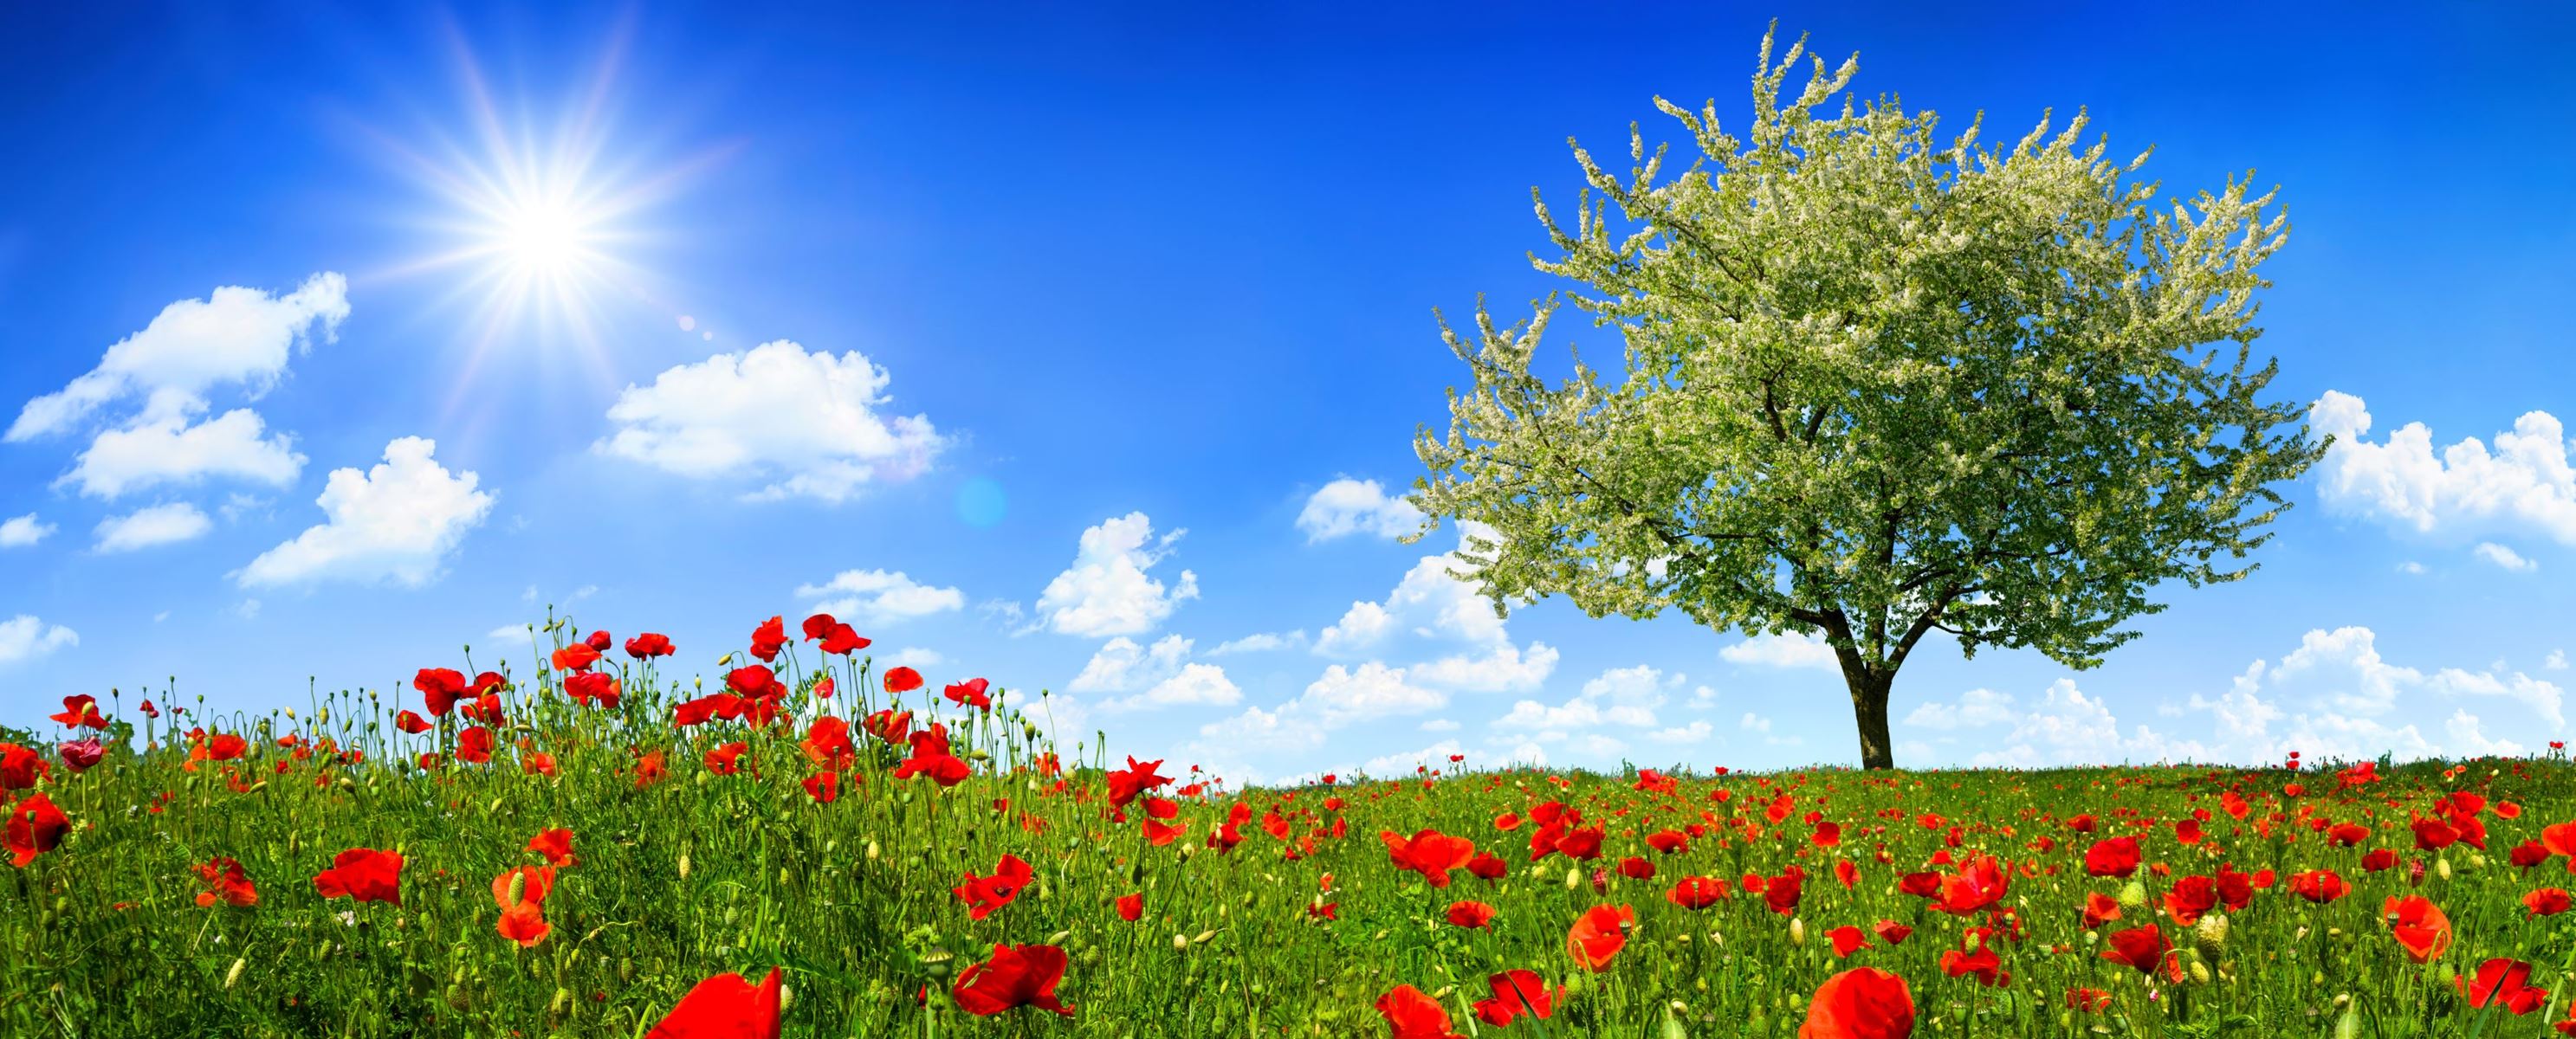 Red flowers in a meadow with a tree, a few clouds, and a sunny, blue sky in the background